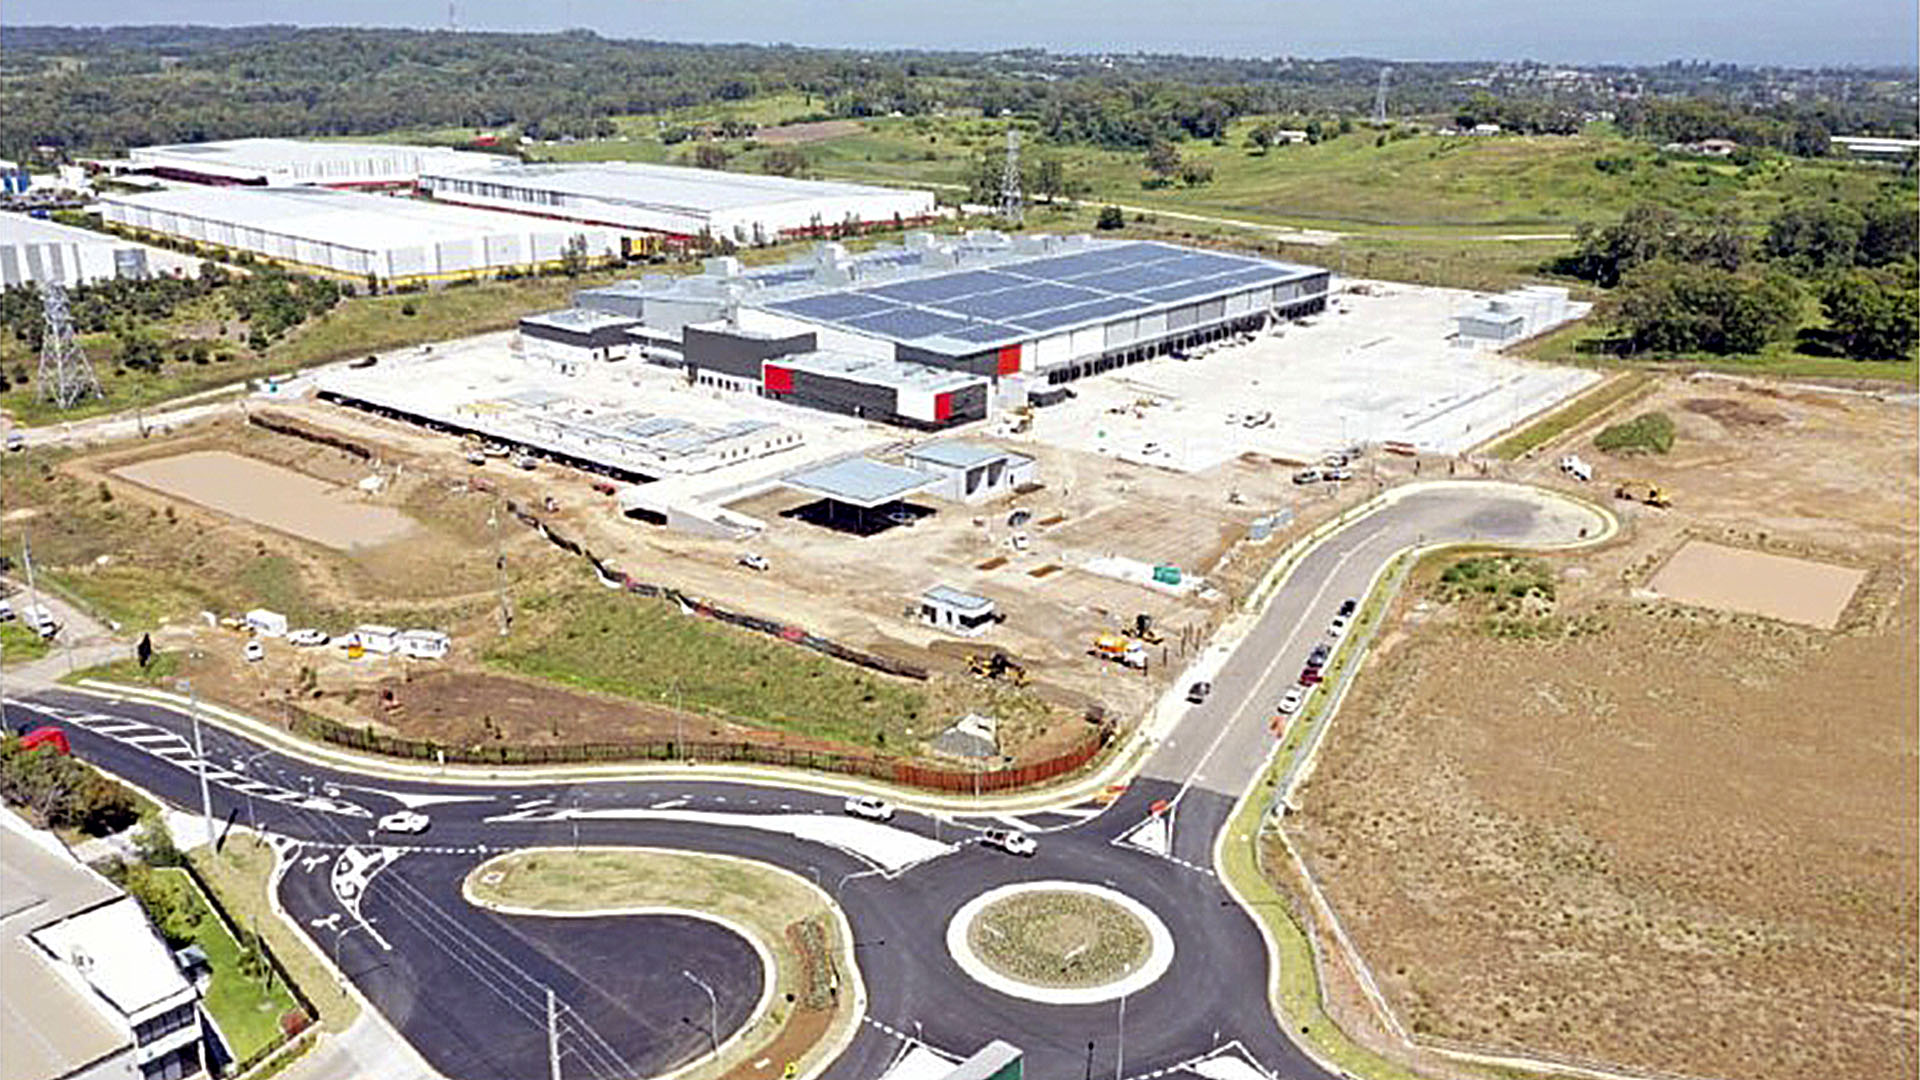 Coles Nearing Completion - Sydney